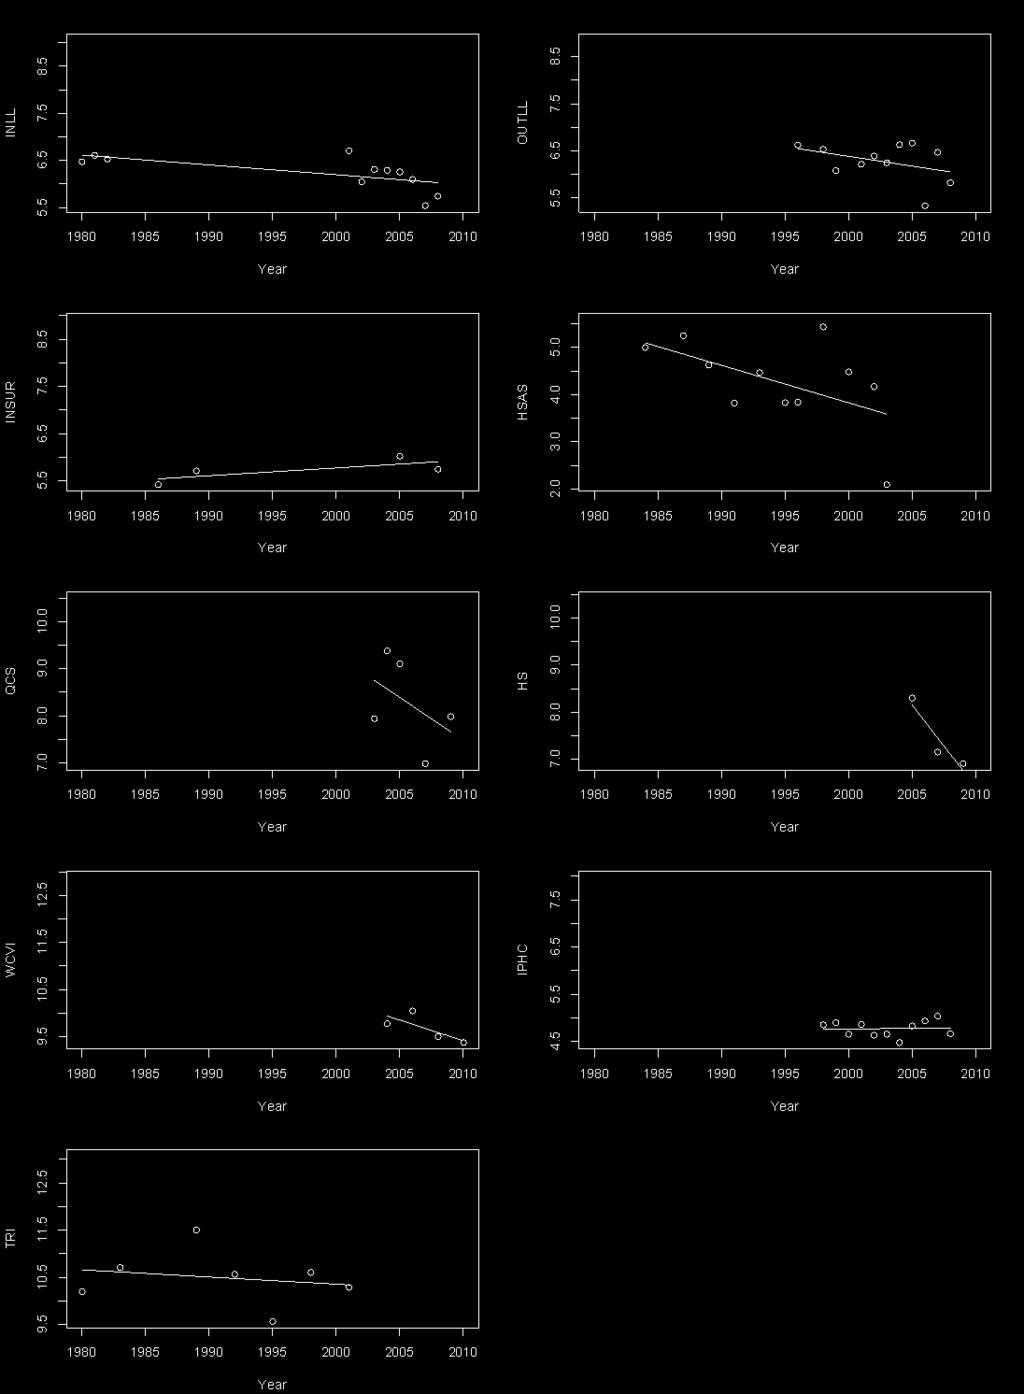 Figure 14. Log linear regressions of the various time series of Spiny Dogfish abundance. The y-axis is the natural log of the index.